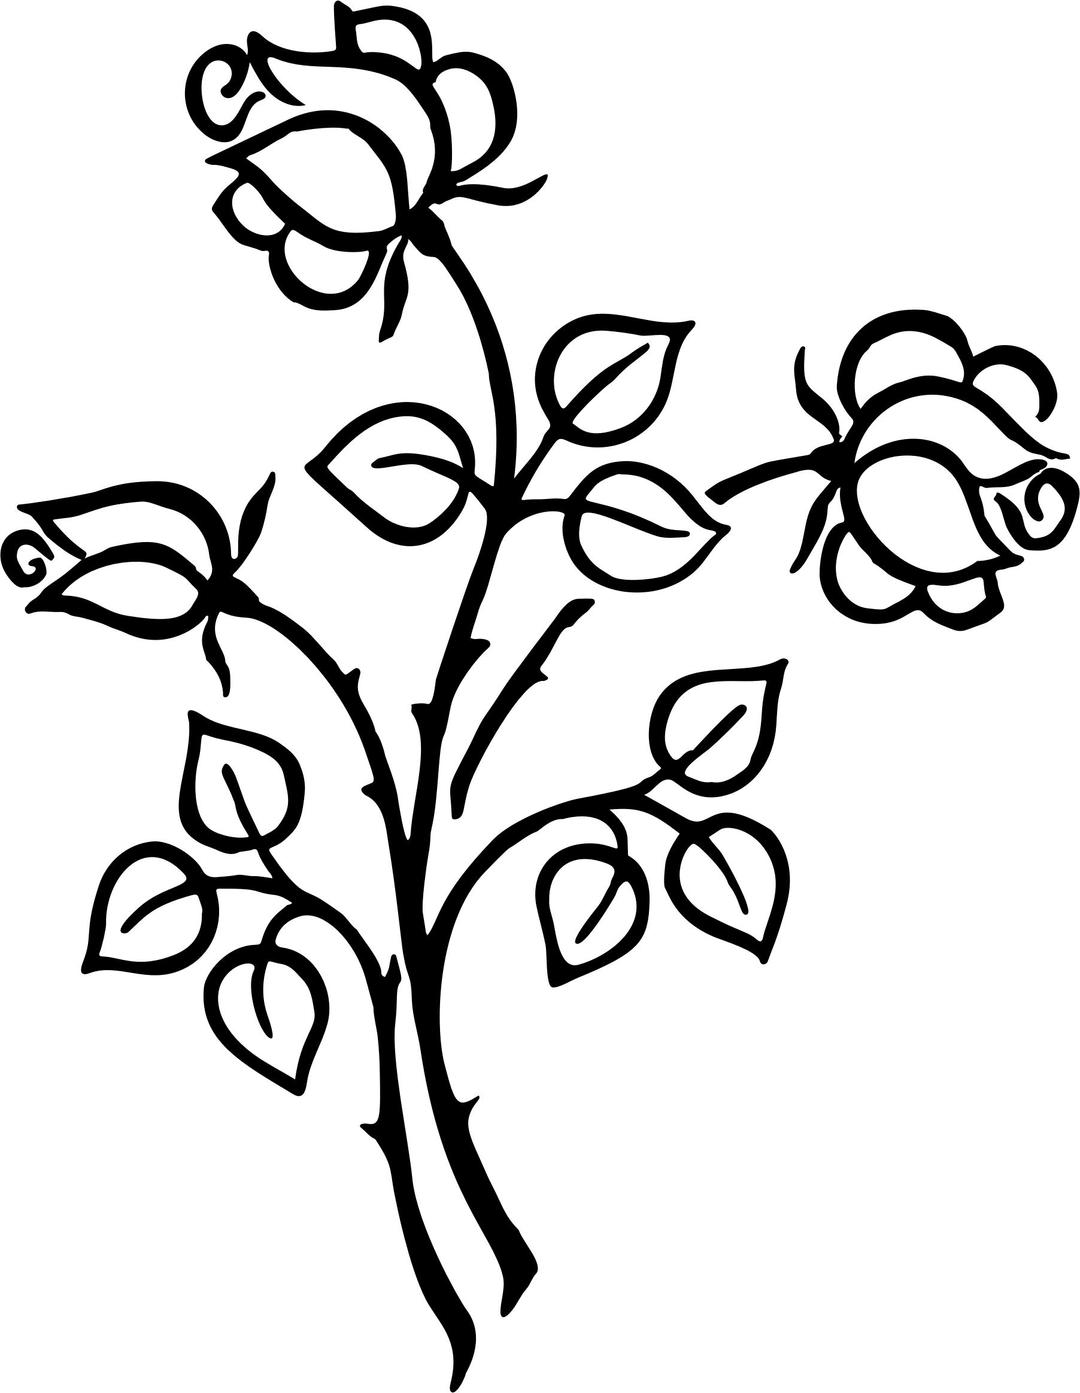 Stylized Roses Line Art png transparent